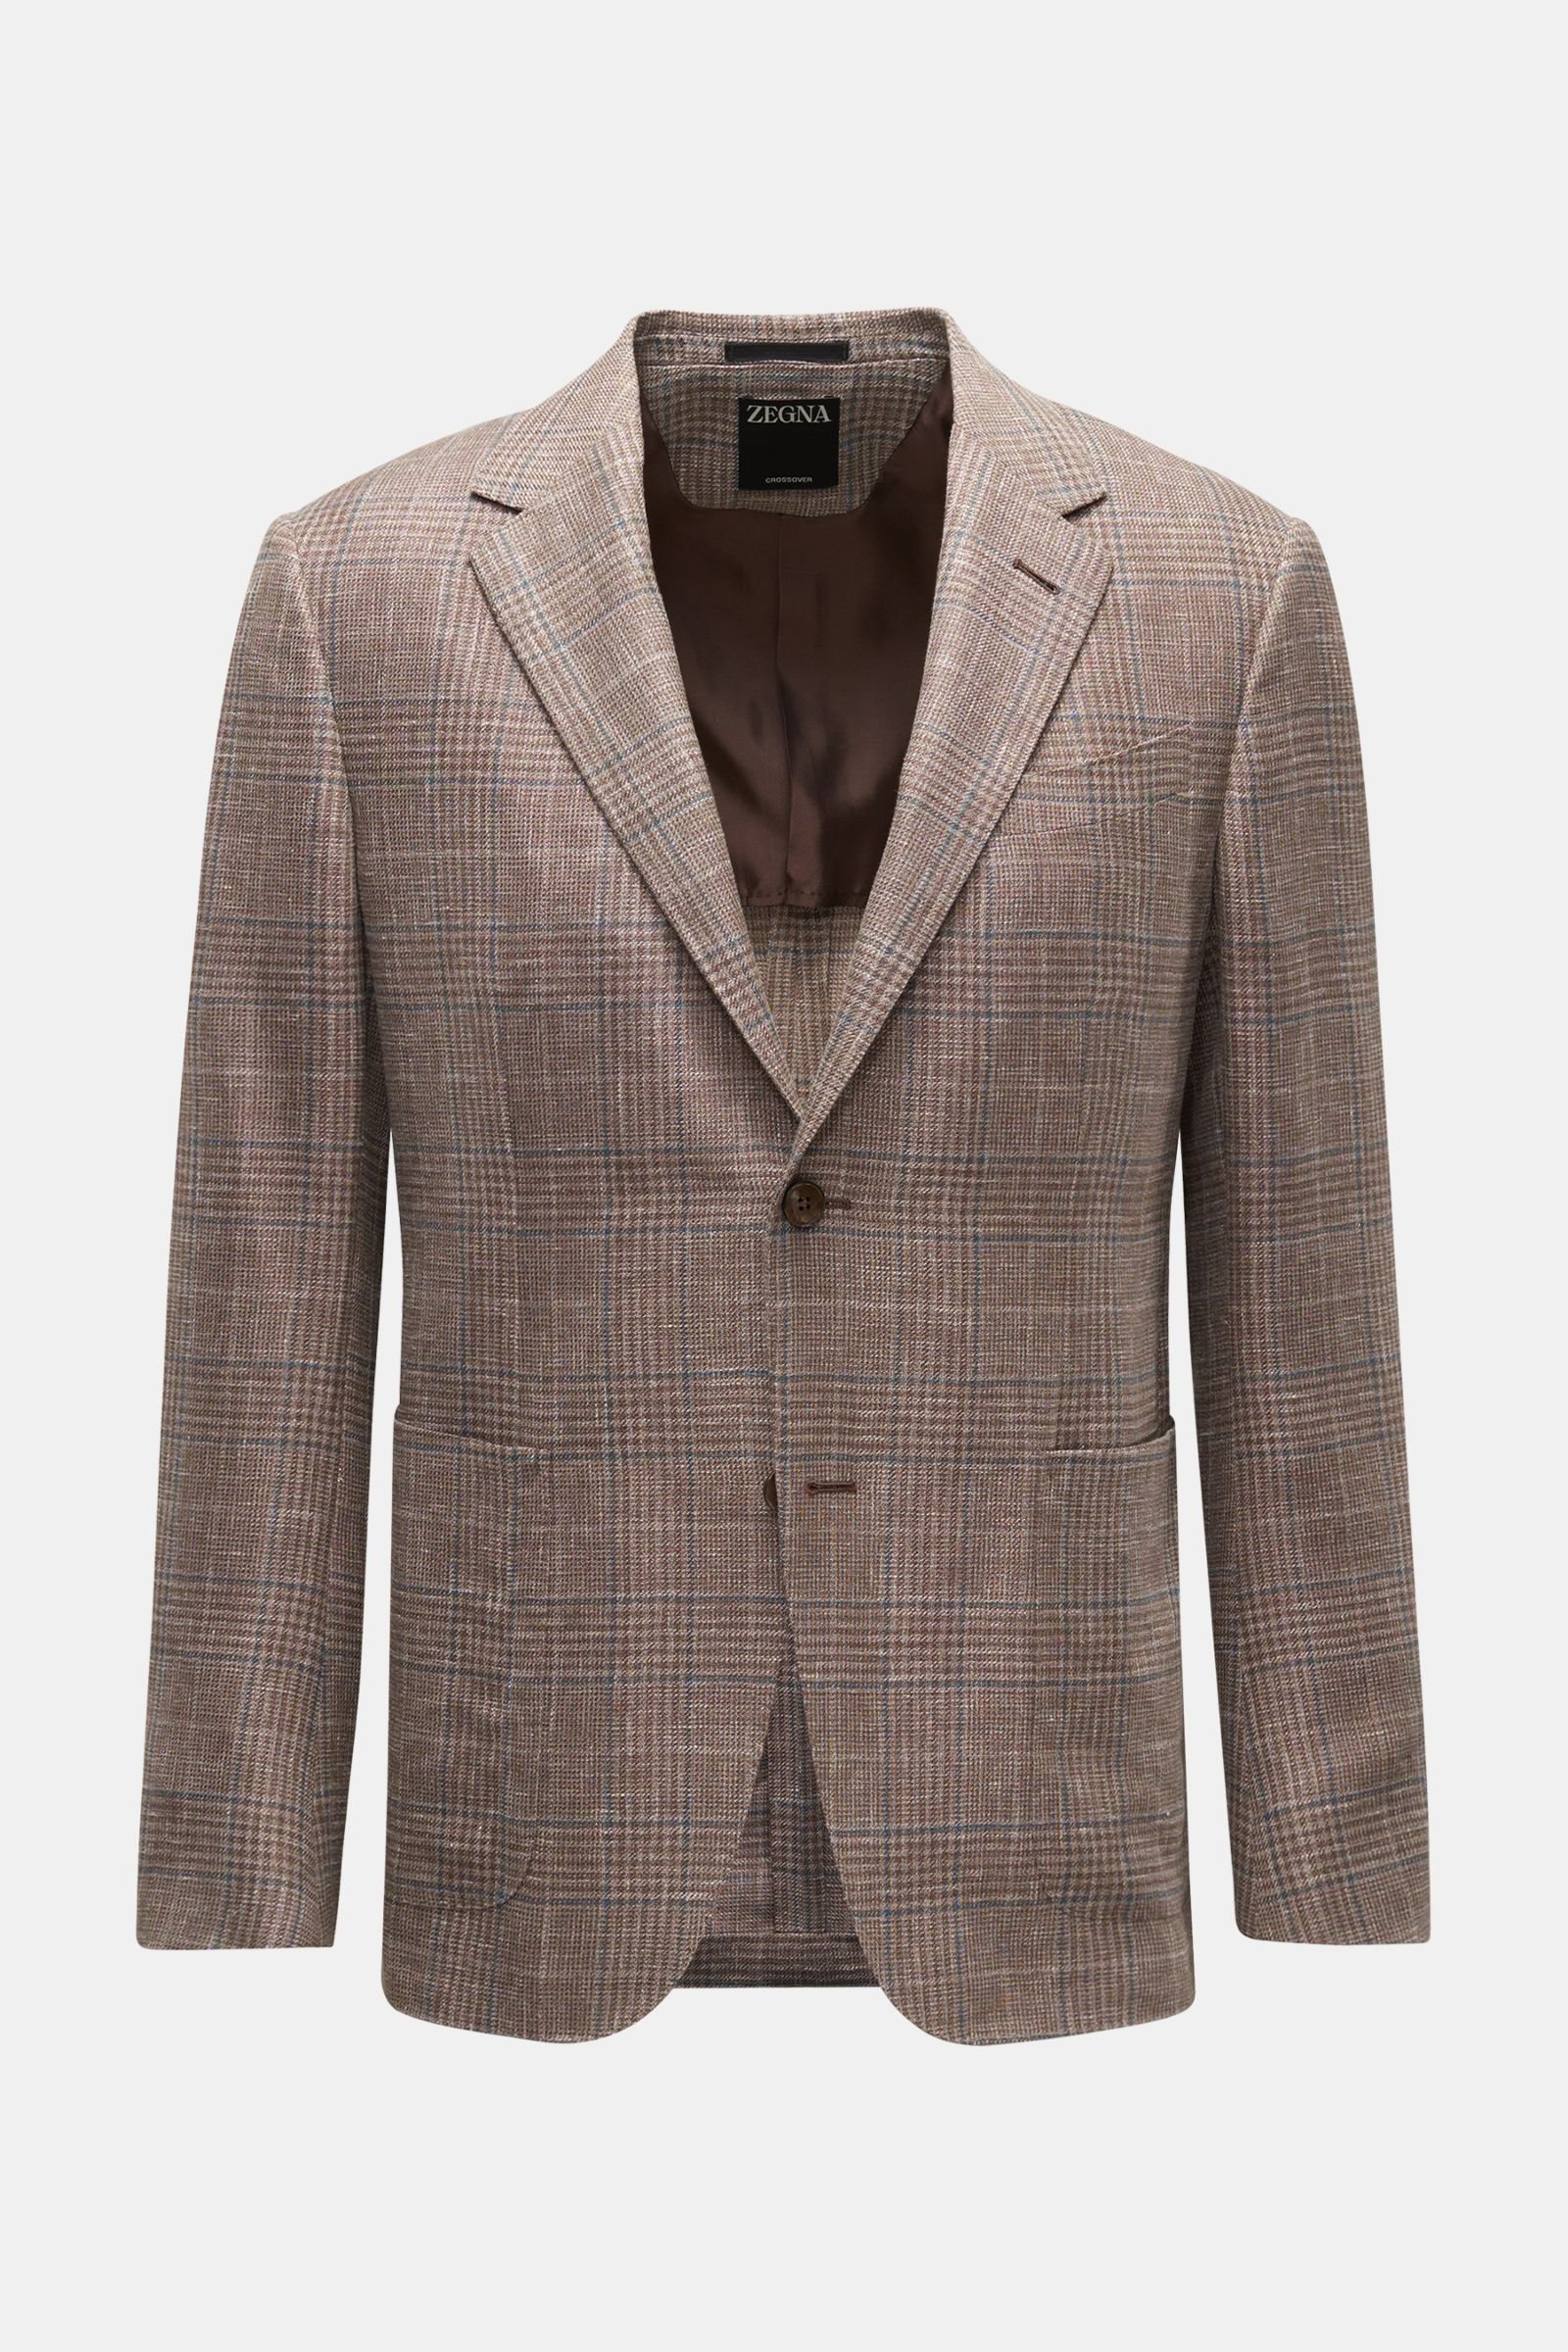 Smart-casual jacket 'Crossover' grey-brown/smoky blue checked